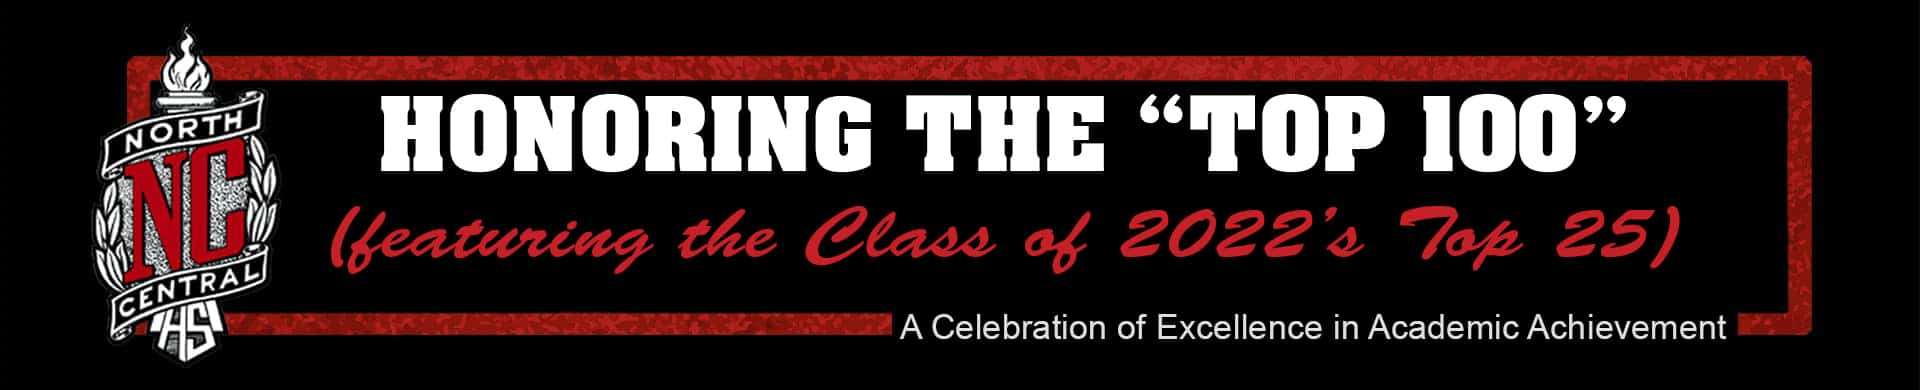 Honoring the Top 100 - A Celebration of Excellence in Academic Achievement